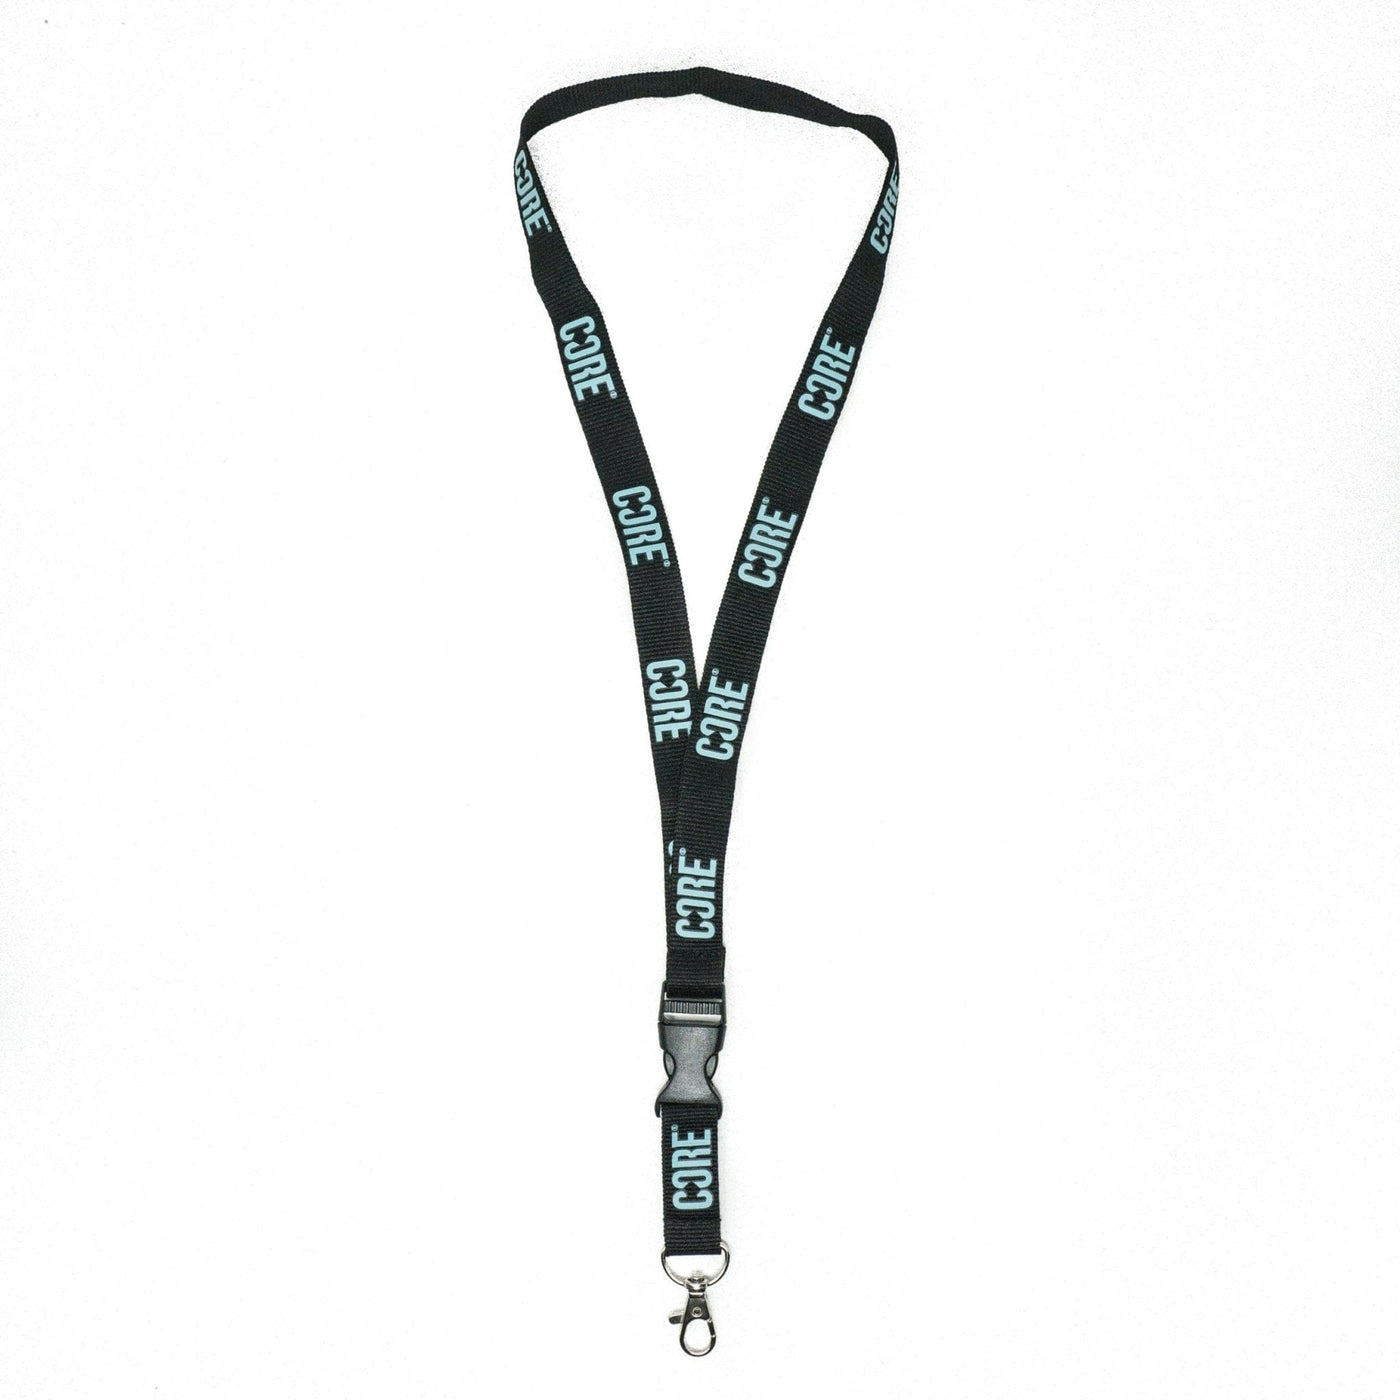 CORE Lanyard Keychain - Black/Teal - CORE Protection